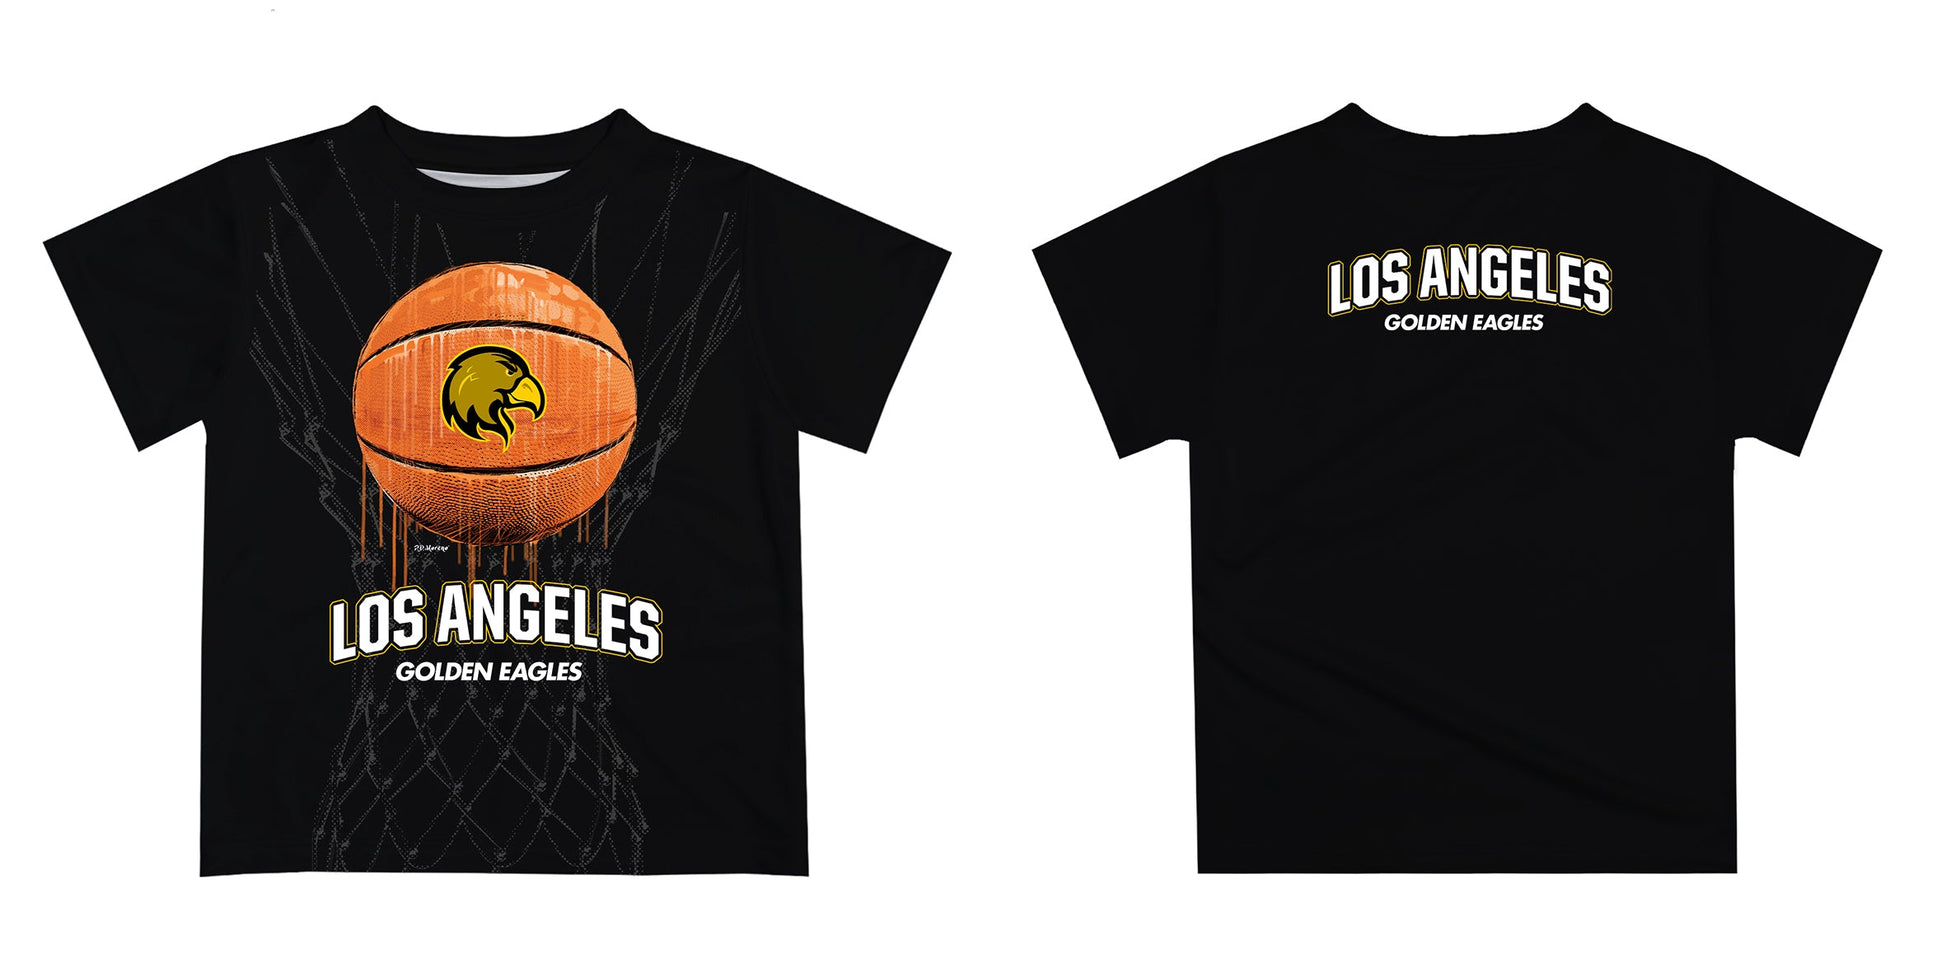 Cal State Los Angeles Golden Eagles Original Dripping Basketball Black T-Shirt by Vive La Fete